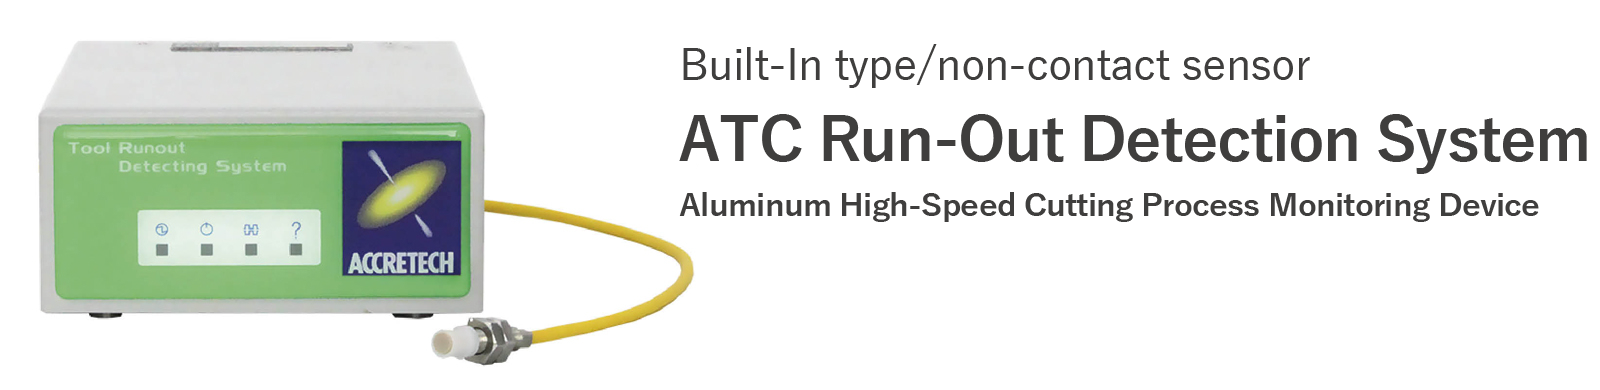 ATC Run-Out Detection System